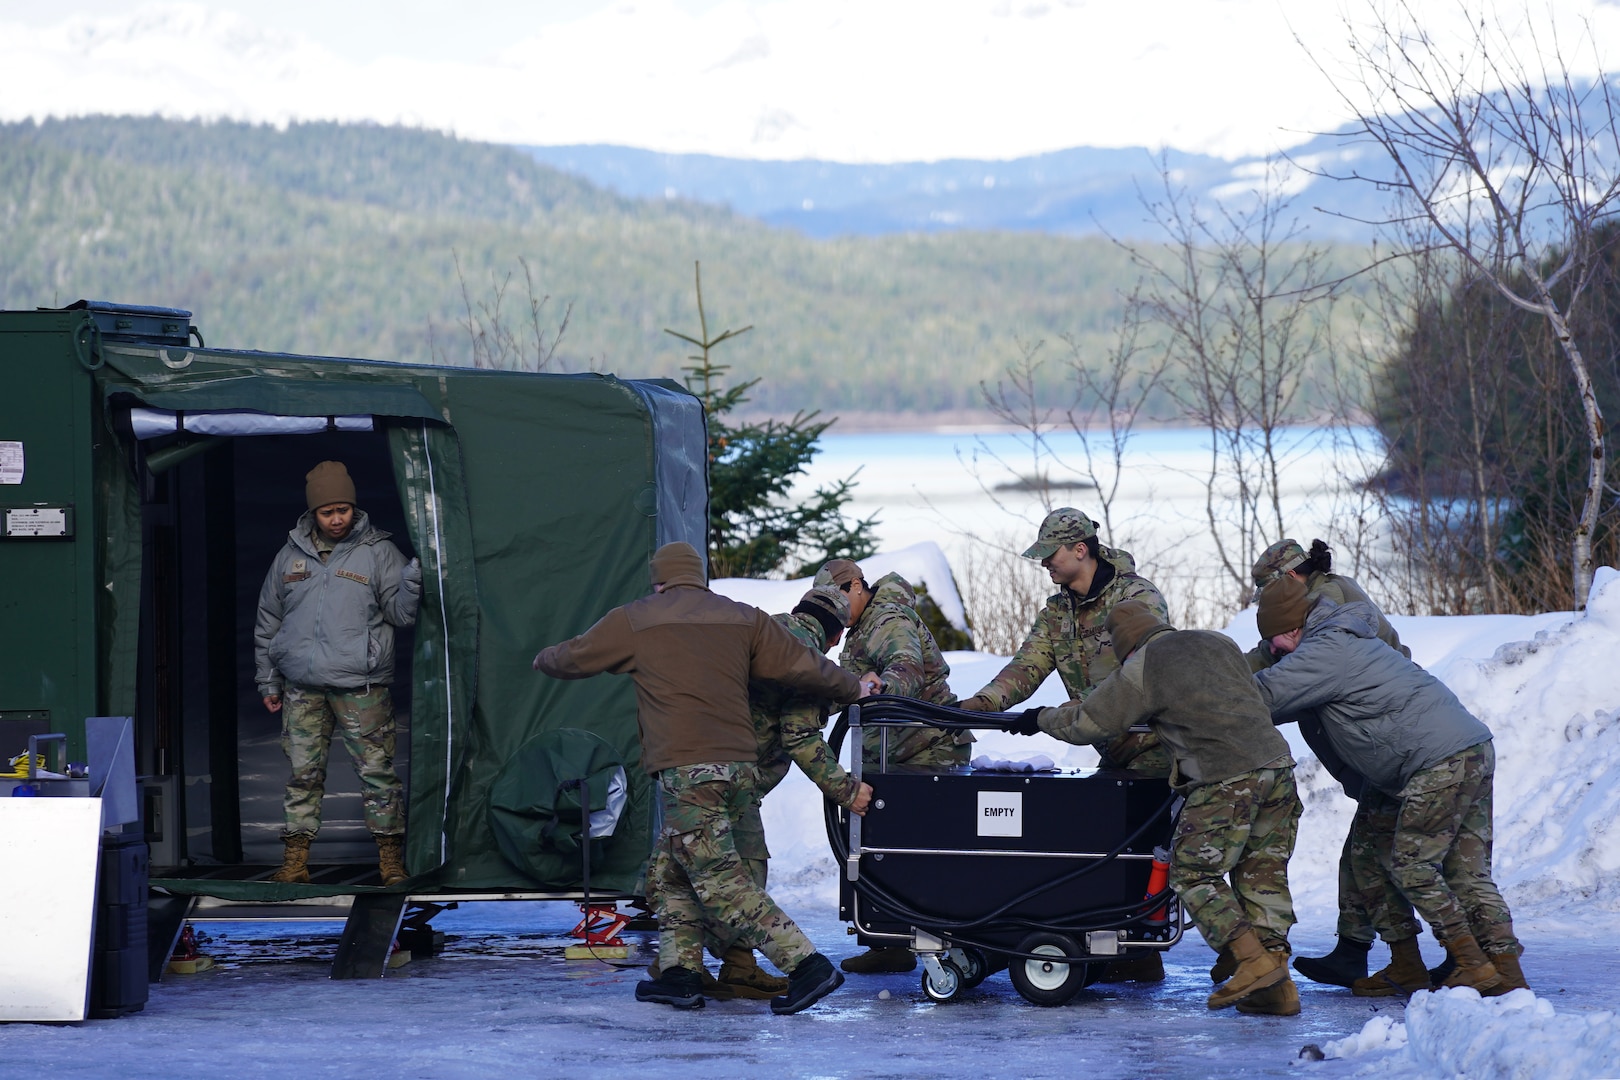 Alaska and Maine Air National Guardsmen move a power generator while disassembling an Expandable Single Pallet Expeditionary Kitchen during Exercise Vigilant Guard 2024-2 (Alaska) at Cordova, Alaska, March 6, 2024. The full-scale exercise was designed to ensure effective coordination and emergency response among local, state, private sector, non-governmental organizations and federal partners in the event of a natural disaster.